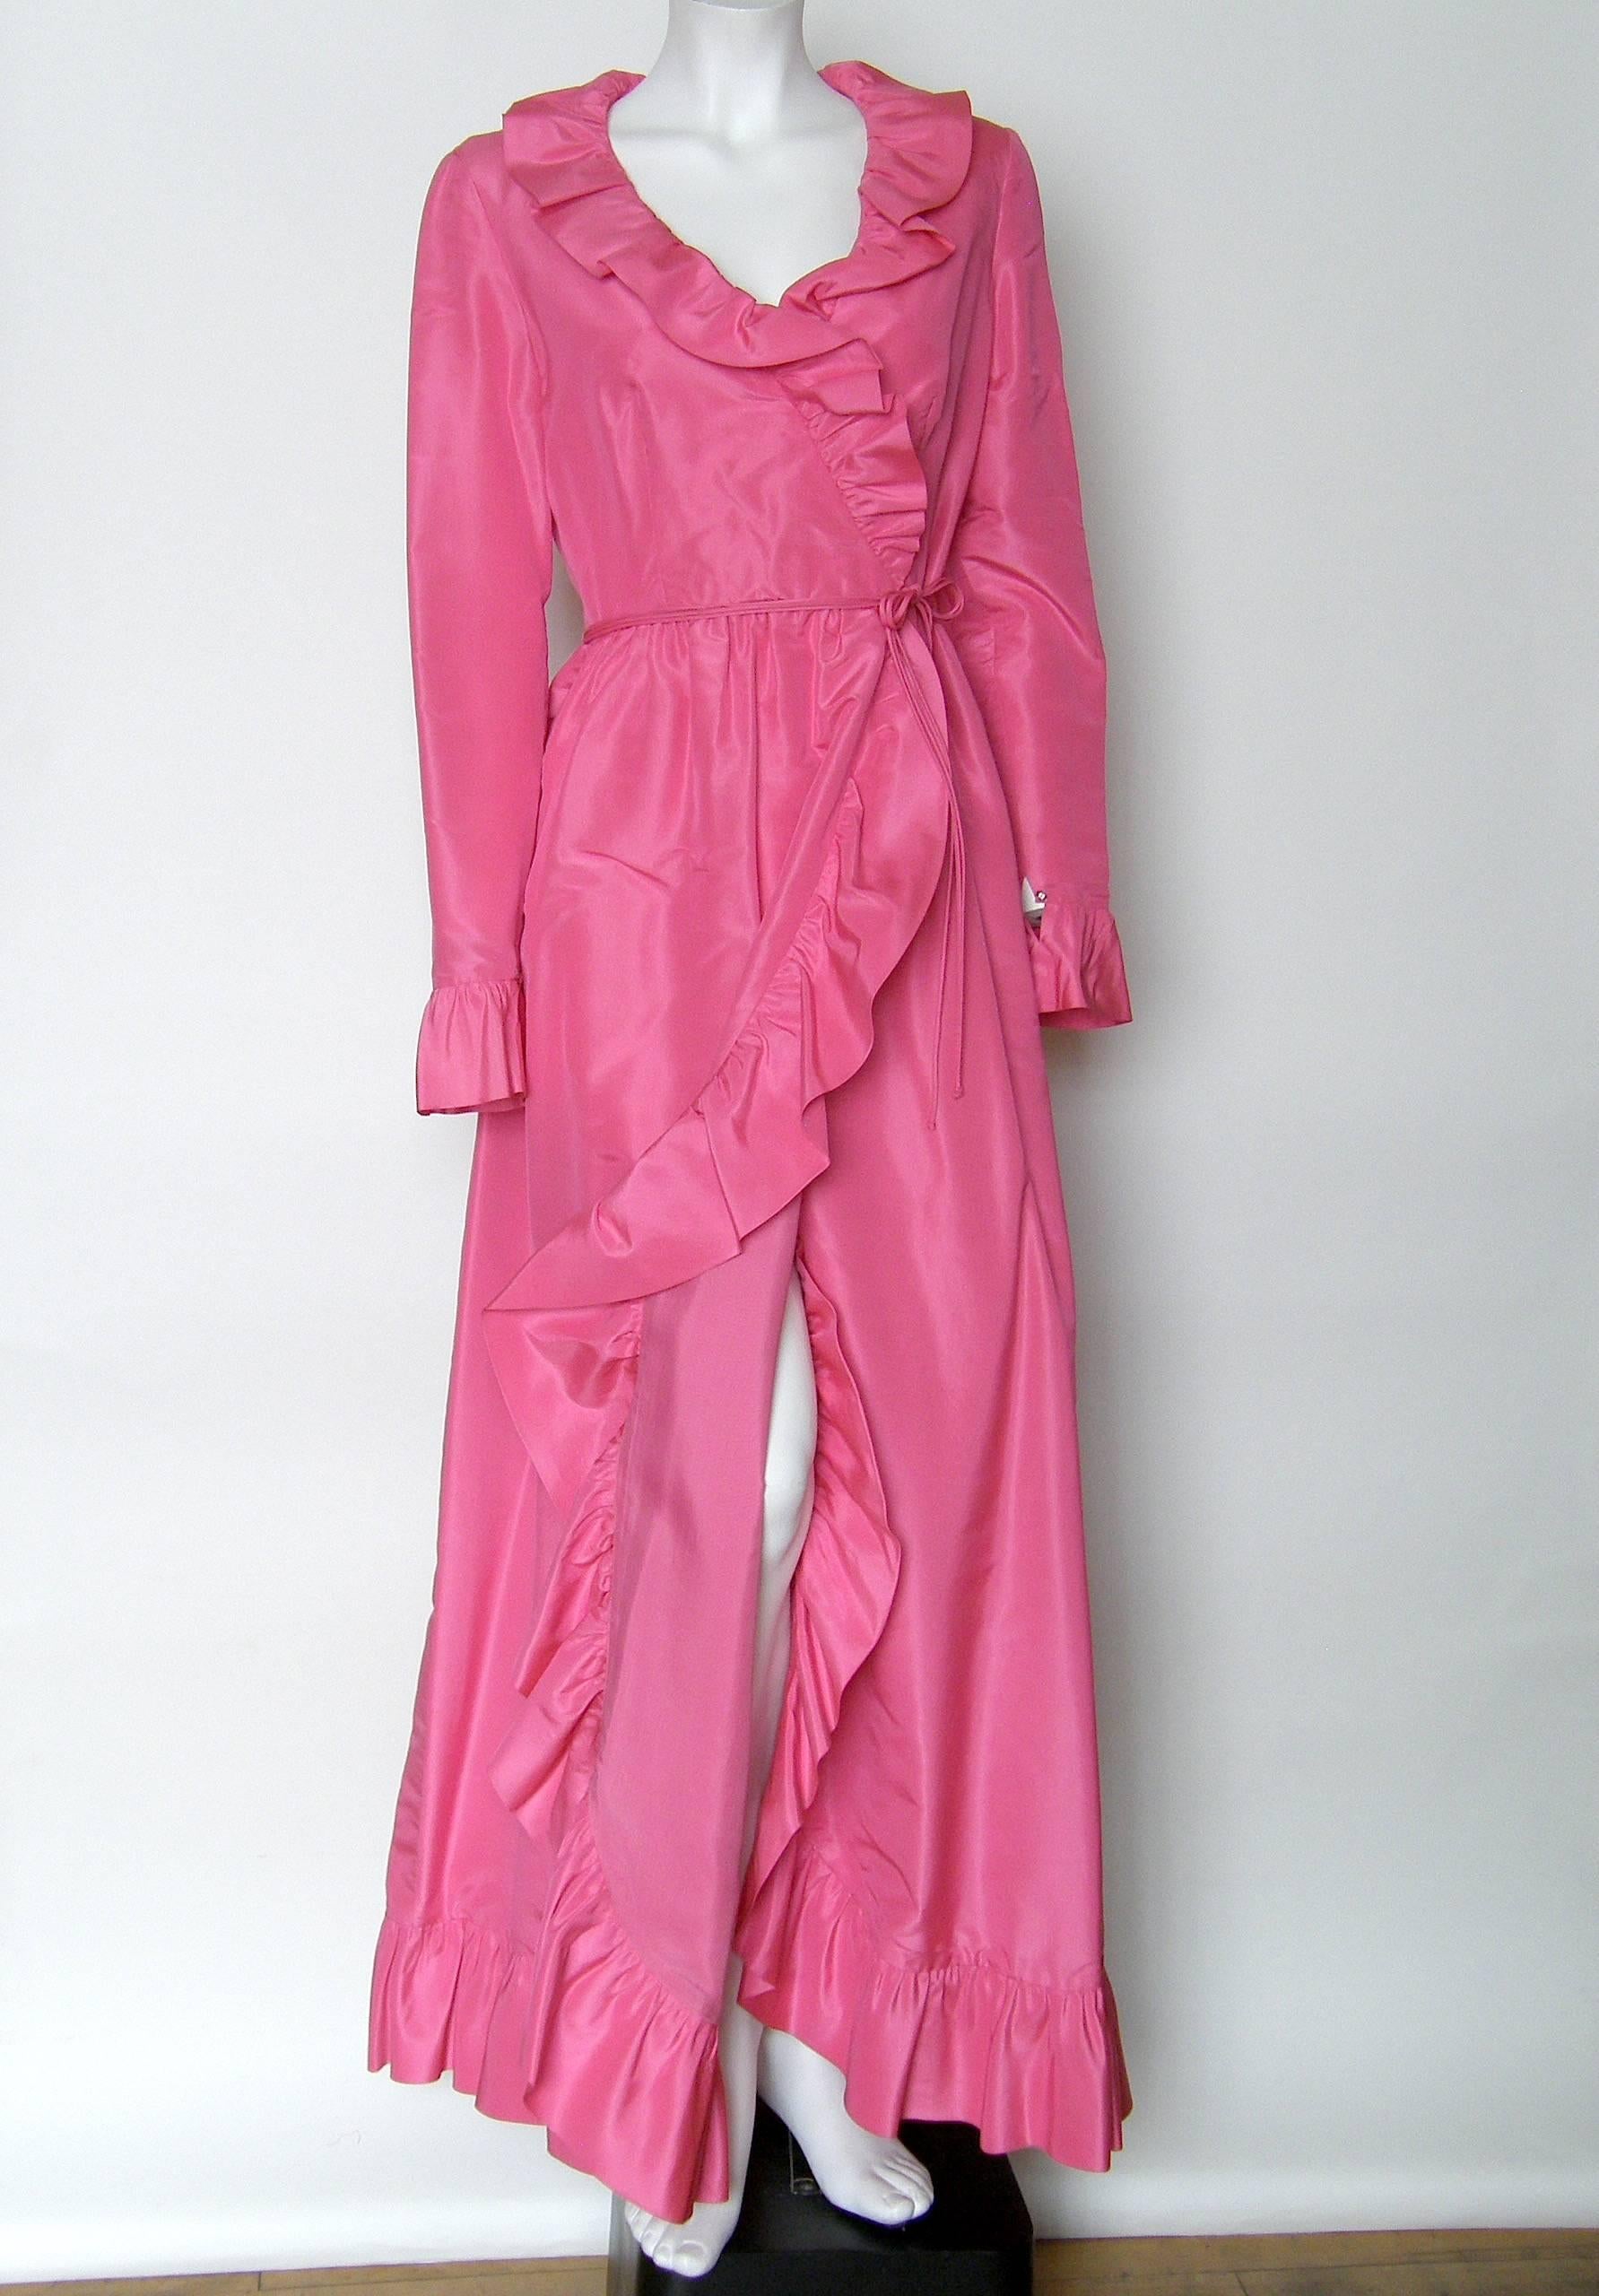 This Mollie Parnis pink taffeta gown has a fixed wrap style with a sexy overlap/slit in front for a peak of leg. The edges are trimmed with playful ruffles, and the fitted sleeves have ruffled cuffs. The attached double cords tie at the